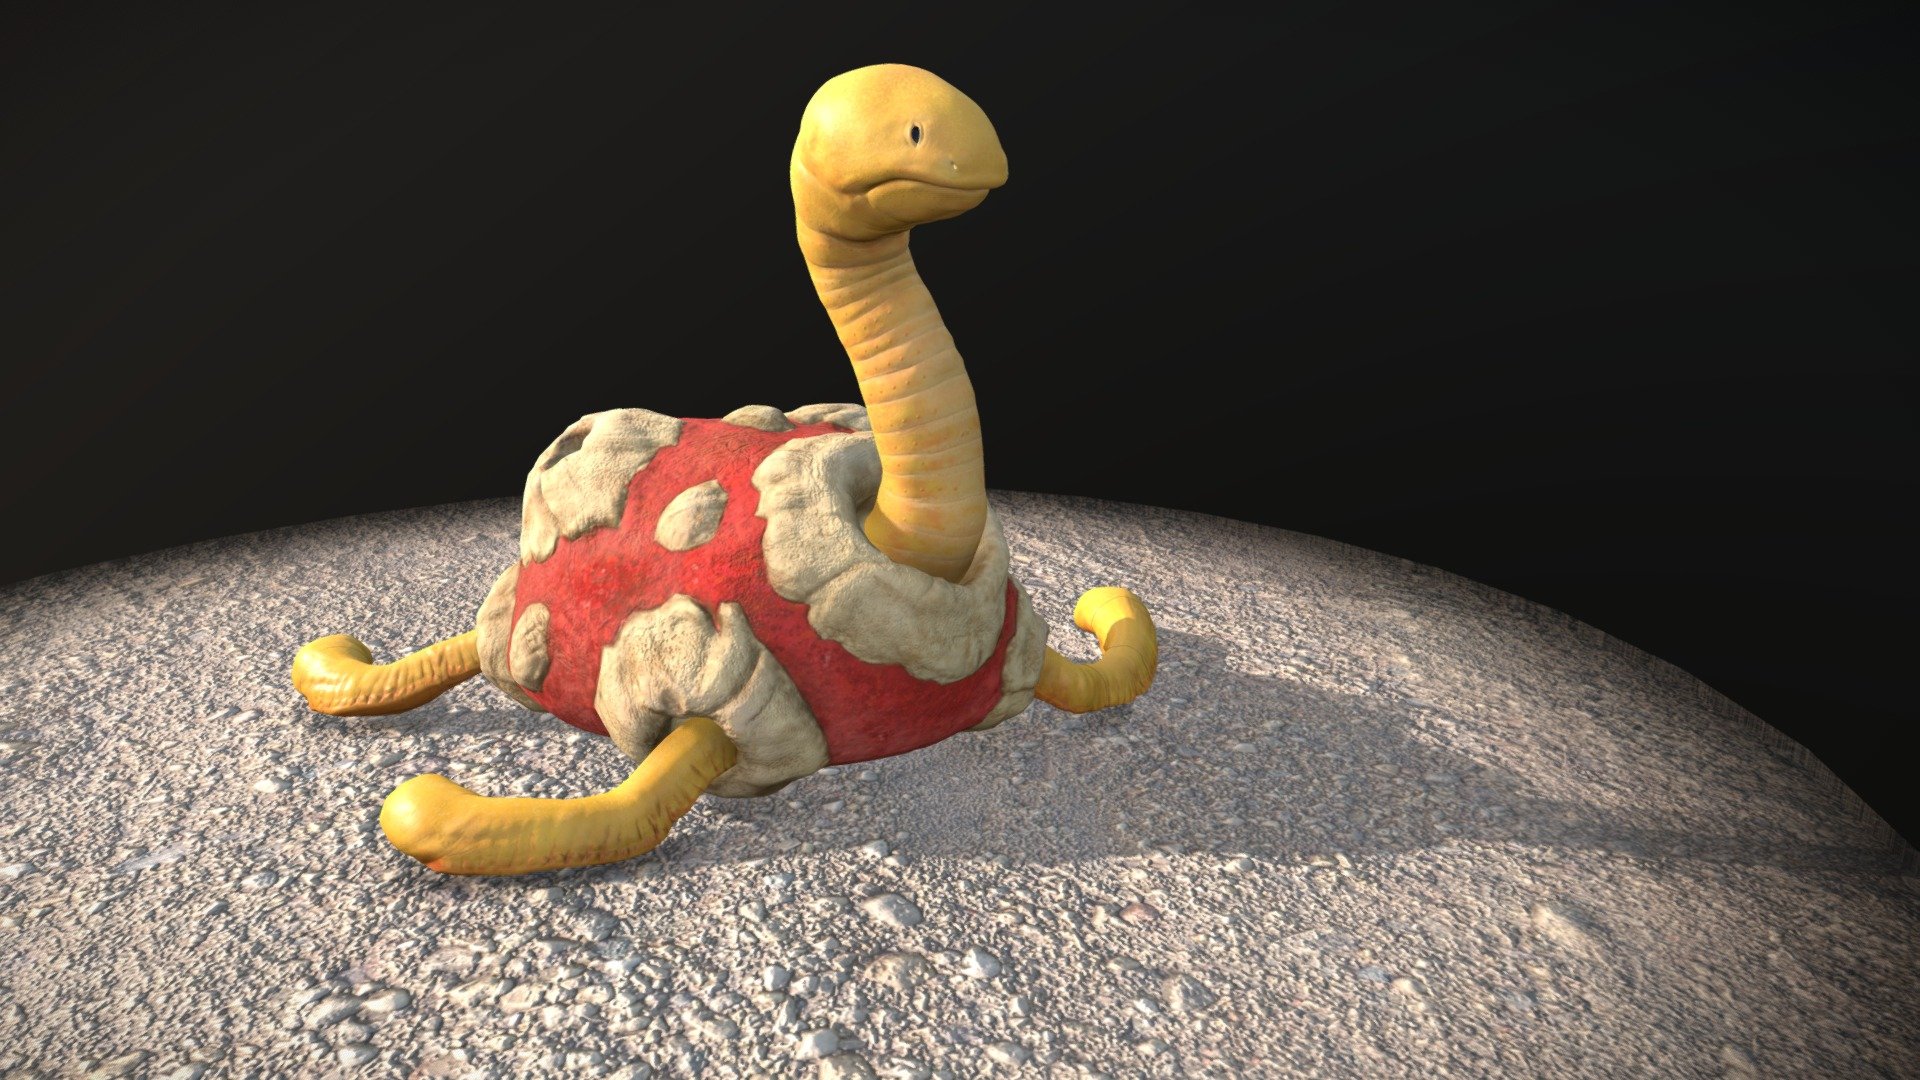 Shuckle Hd Wallpapers